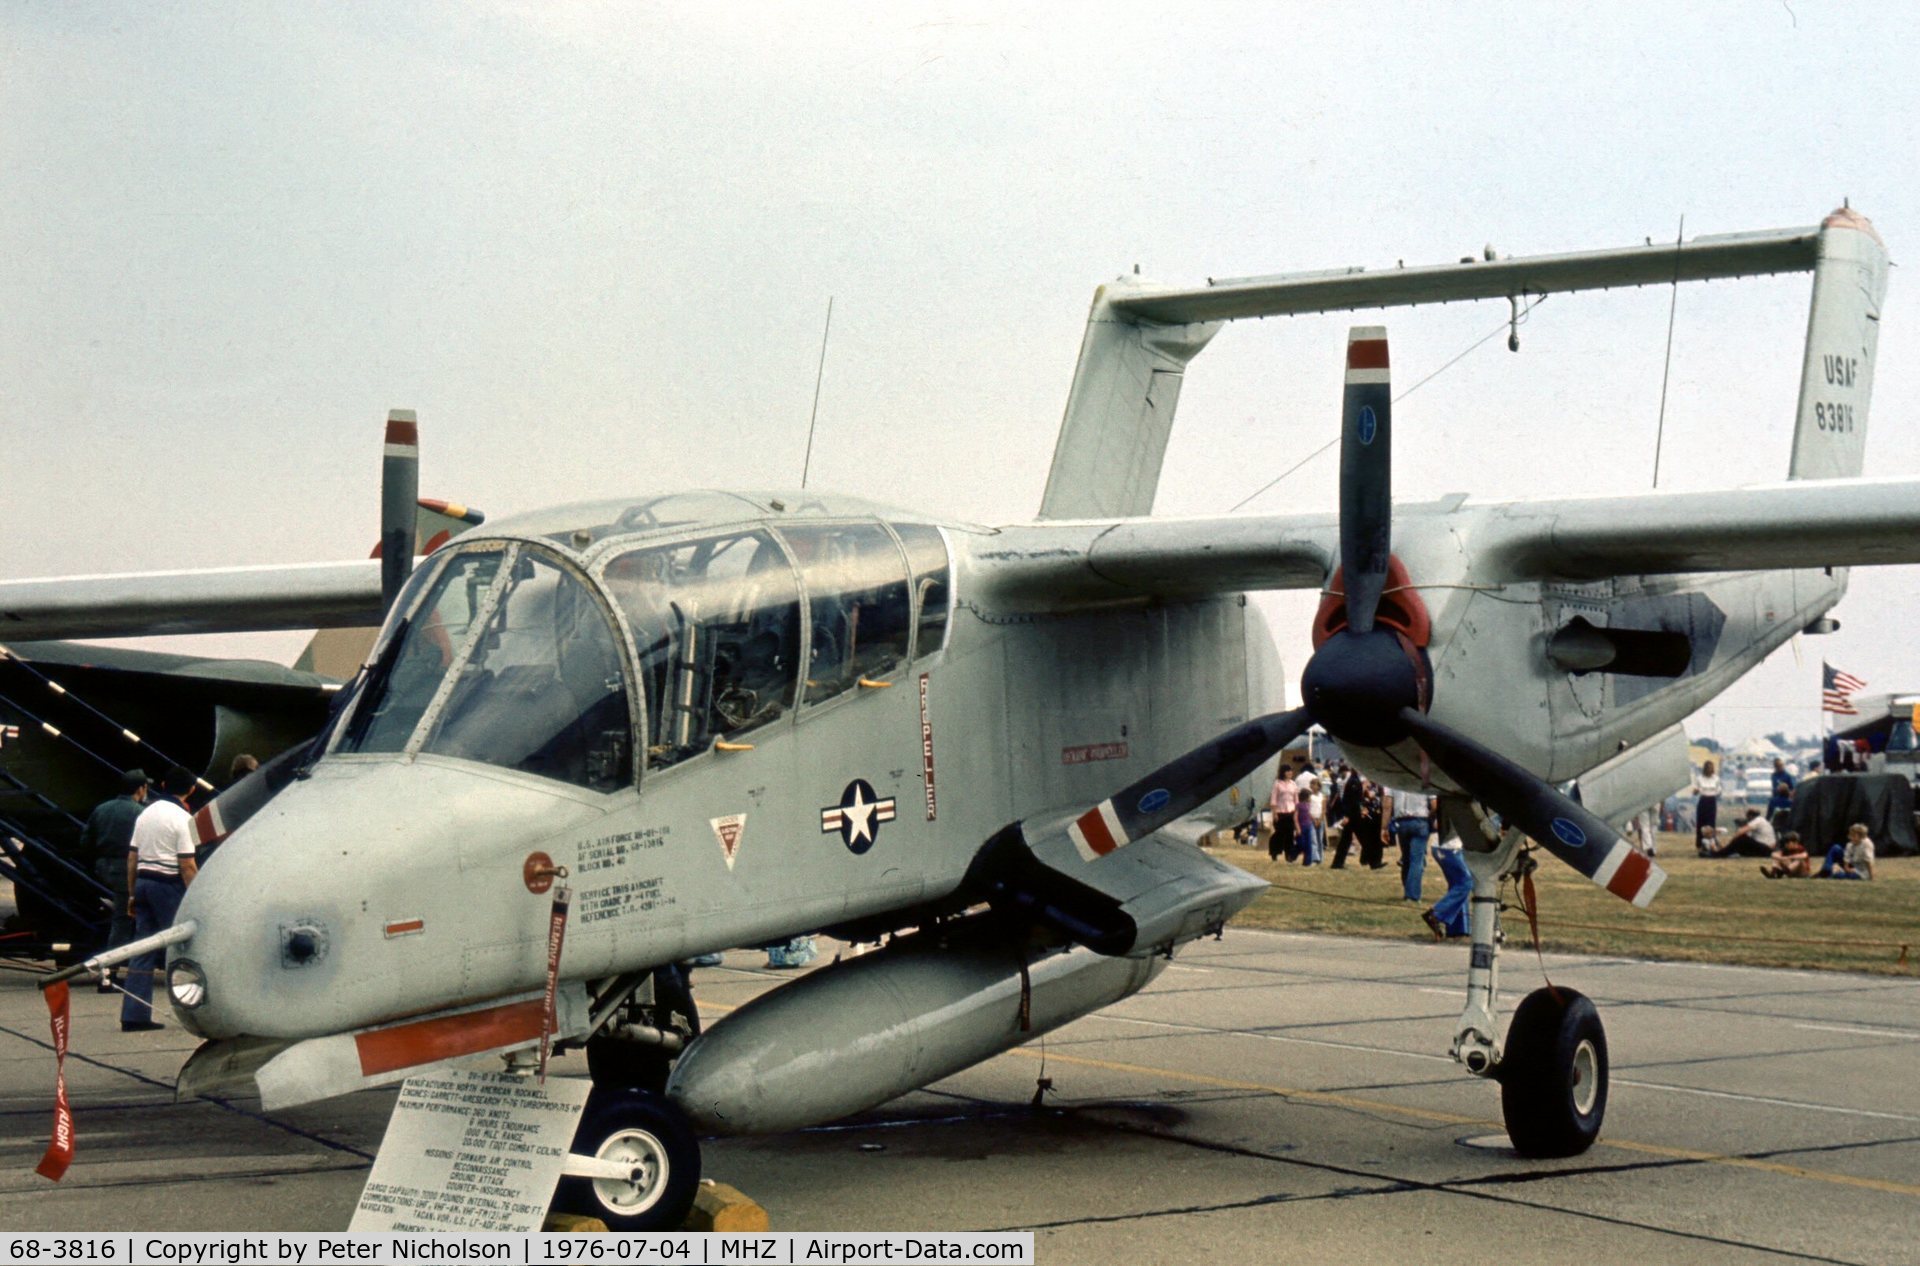 68-3816, 1968 North American Rockwell OV-10A Bronco C/N 321-142, Another view of the 601 TCW OV-10A Bronco at the 1976 Mildenhall Air Fete.